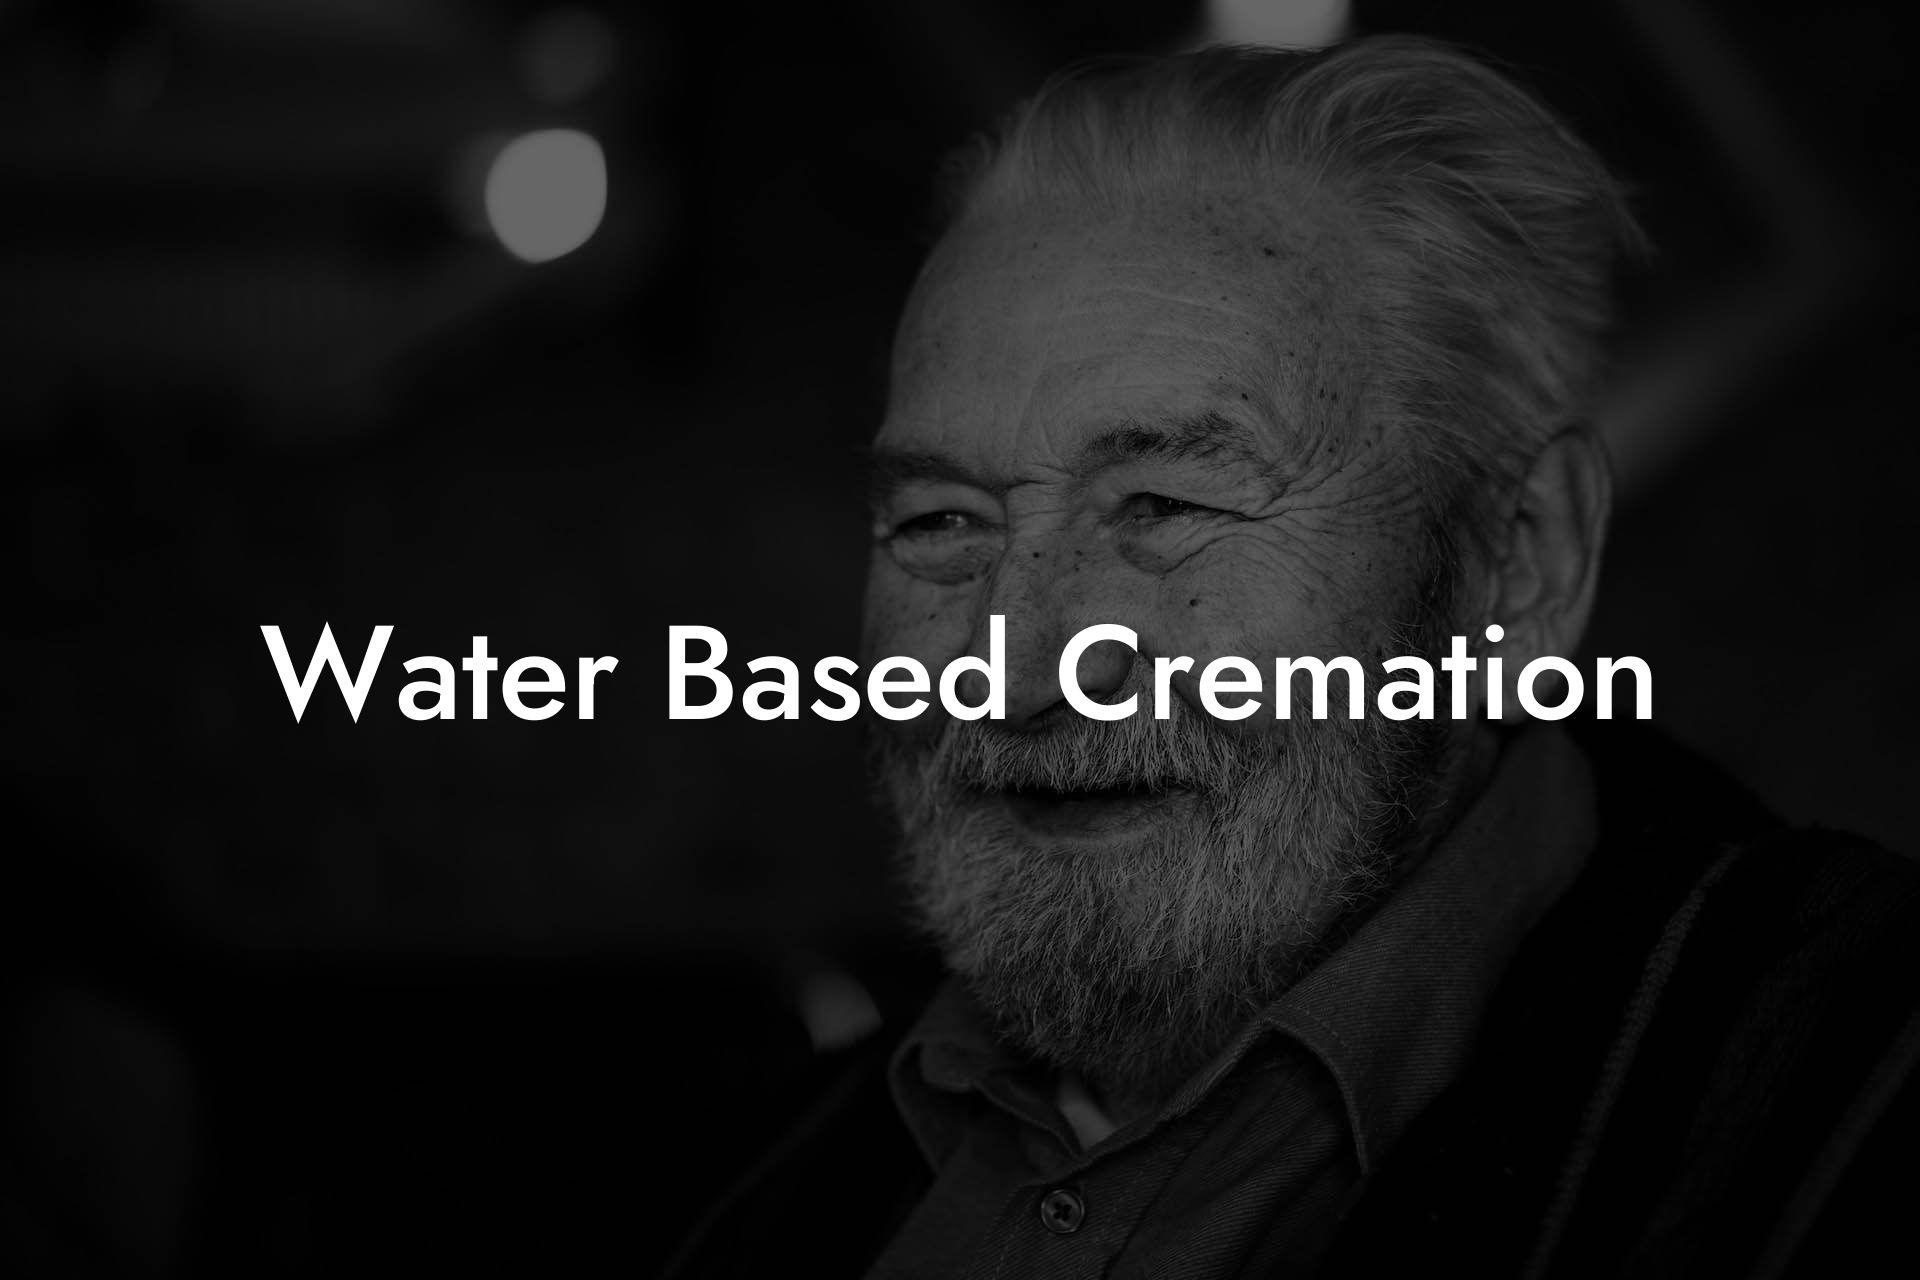 Water Based Cremation